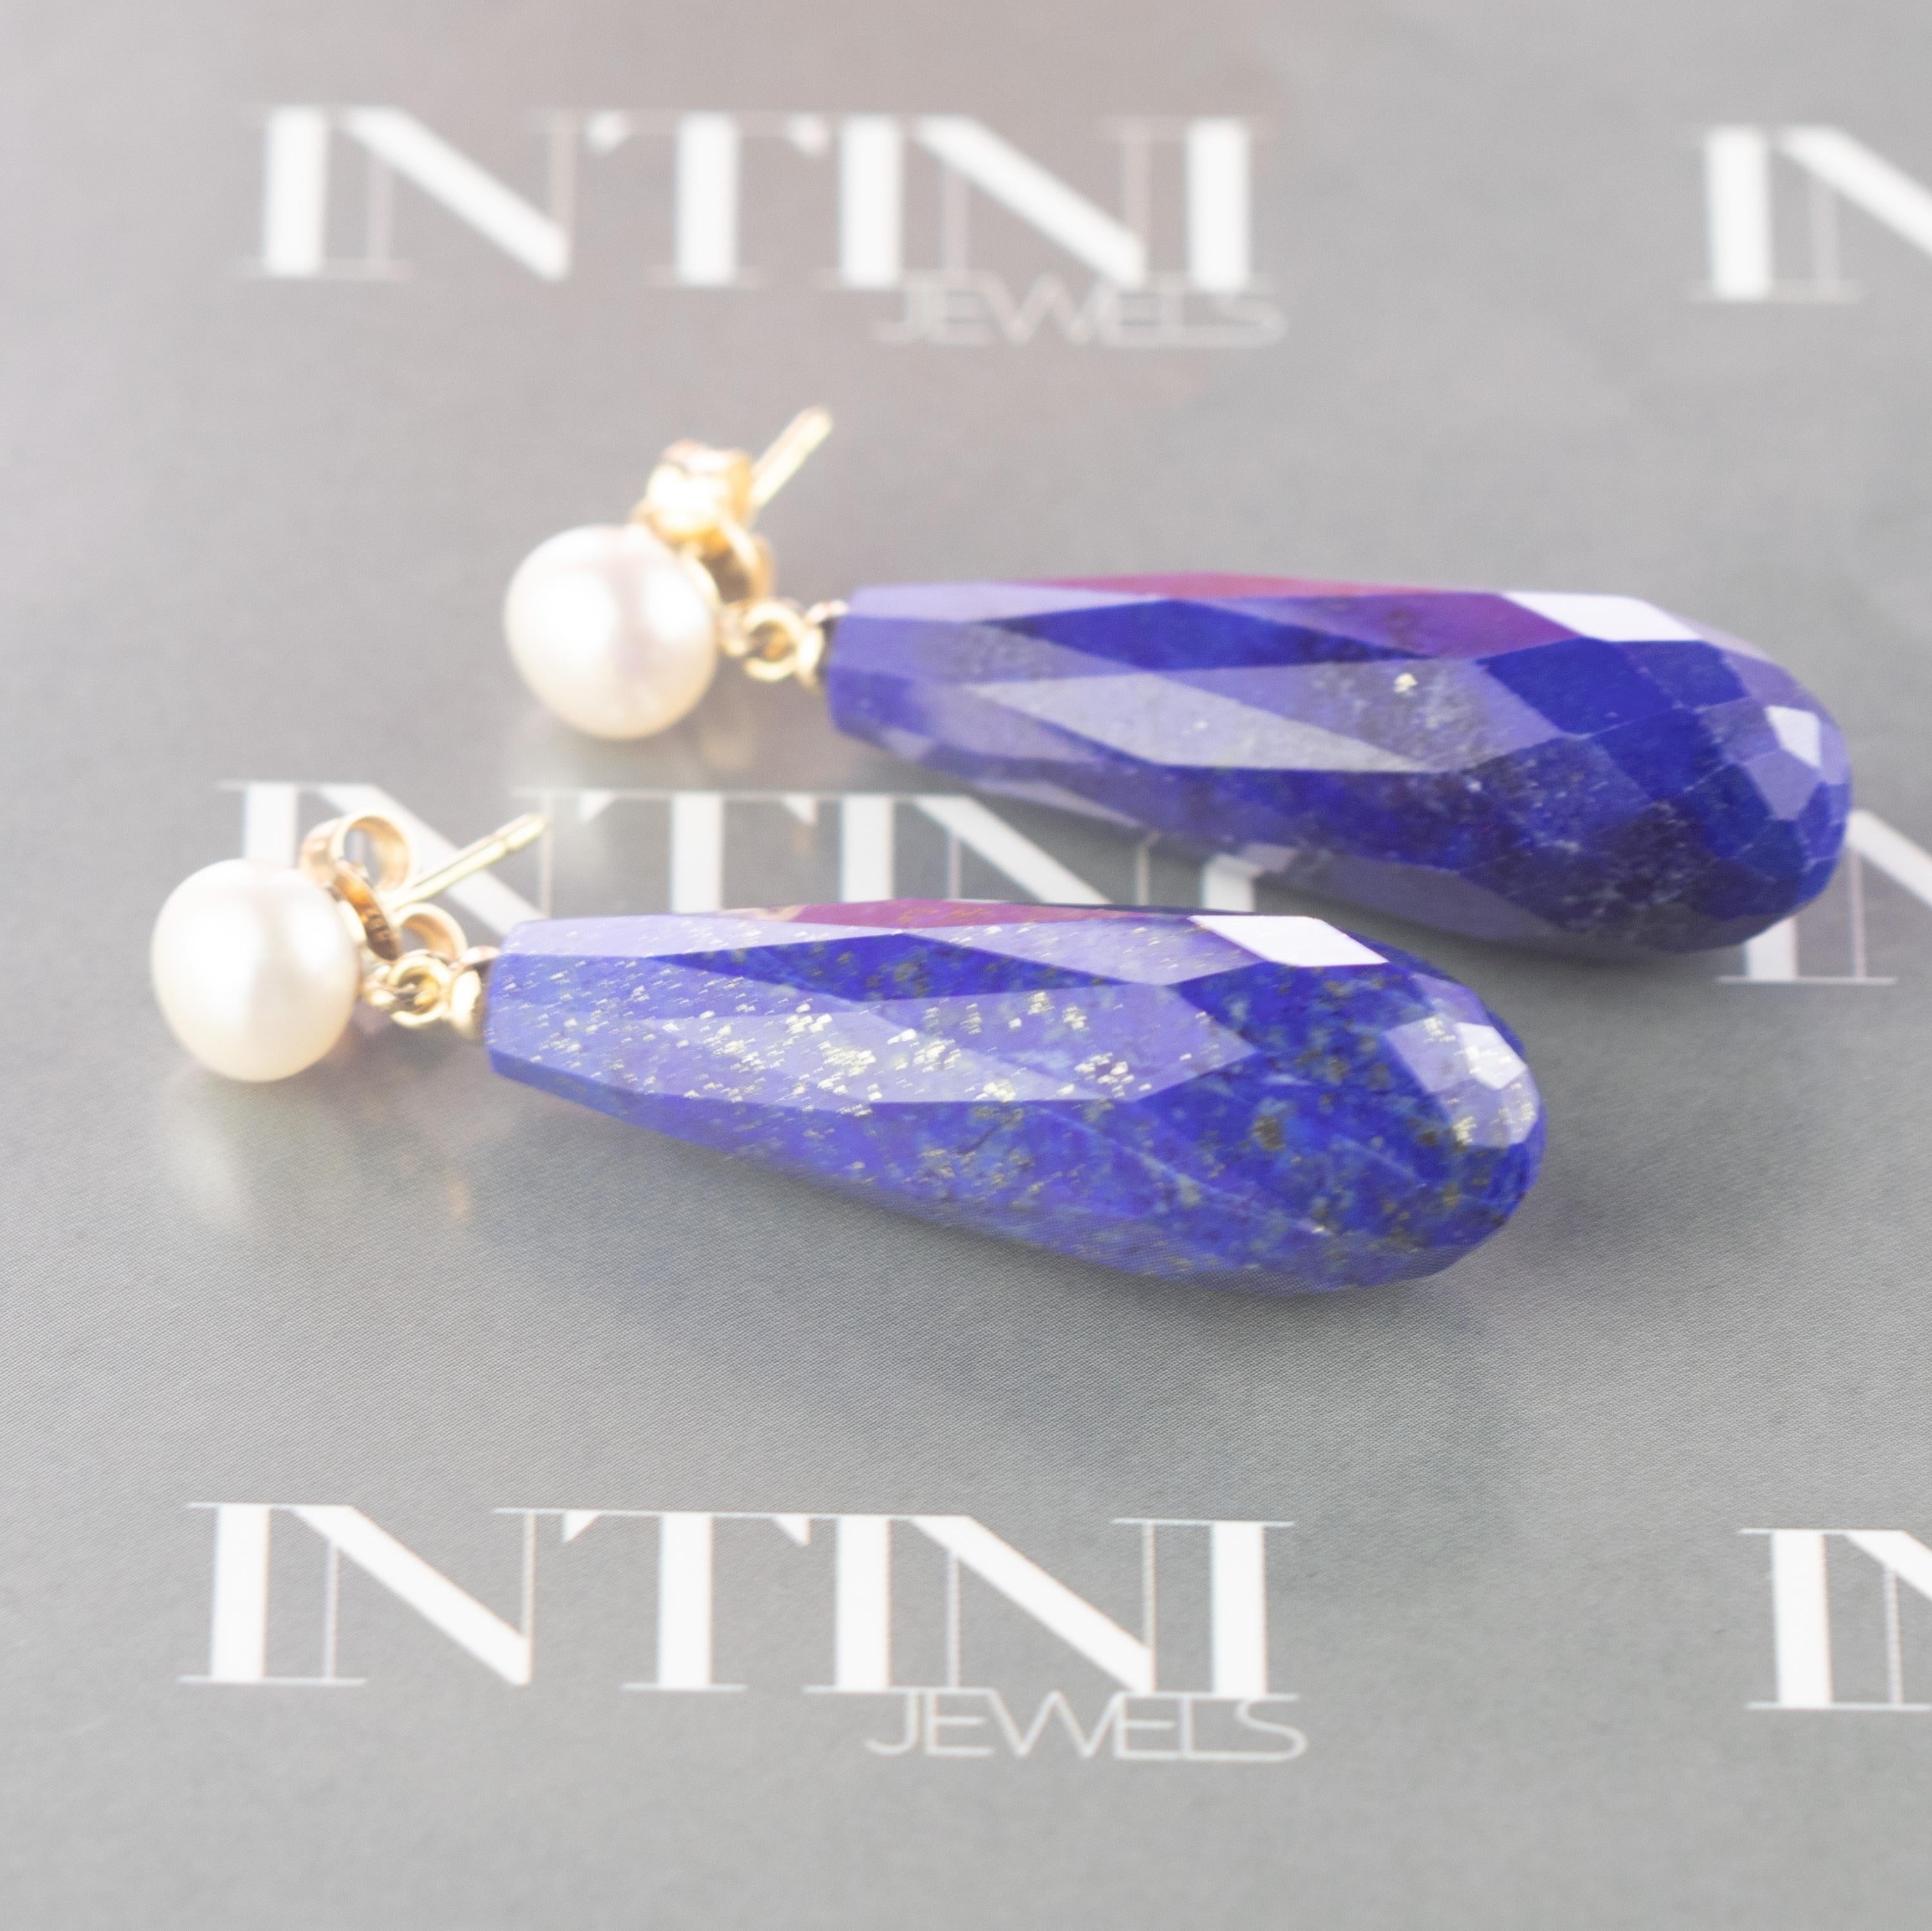 Marvelous faceted lapis lazuli and pearl dangle earrings. Decorated by natural and precious 1.6 g 18 karat yellow gold. The perfect jewel for a summer night full of color and glam. Faceted top quality Lapis Lazuli stone. Cocktail teardrop for any